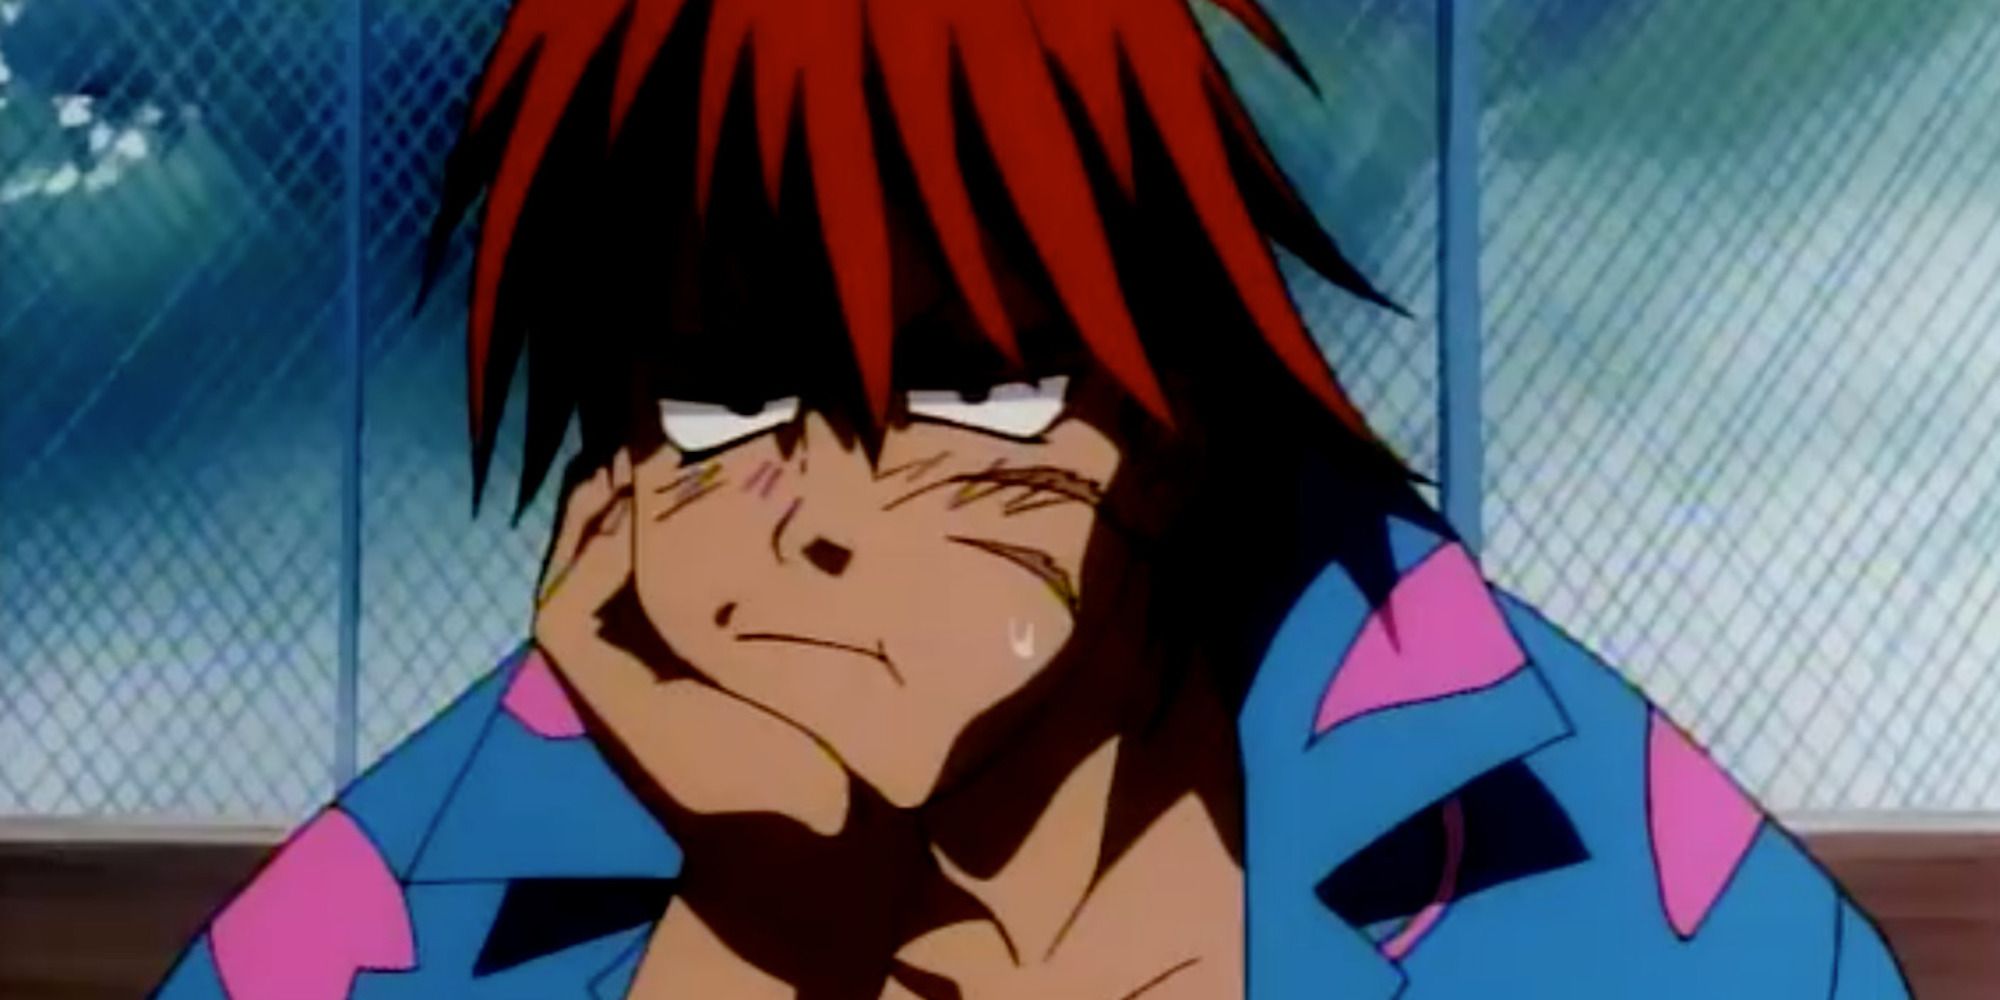 Gene from Outlaw Star